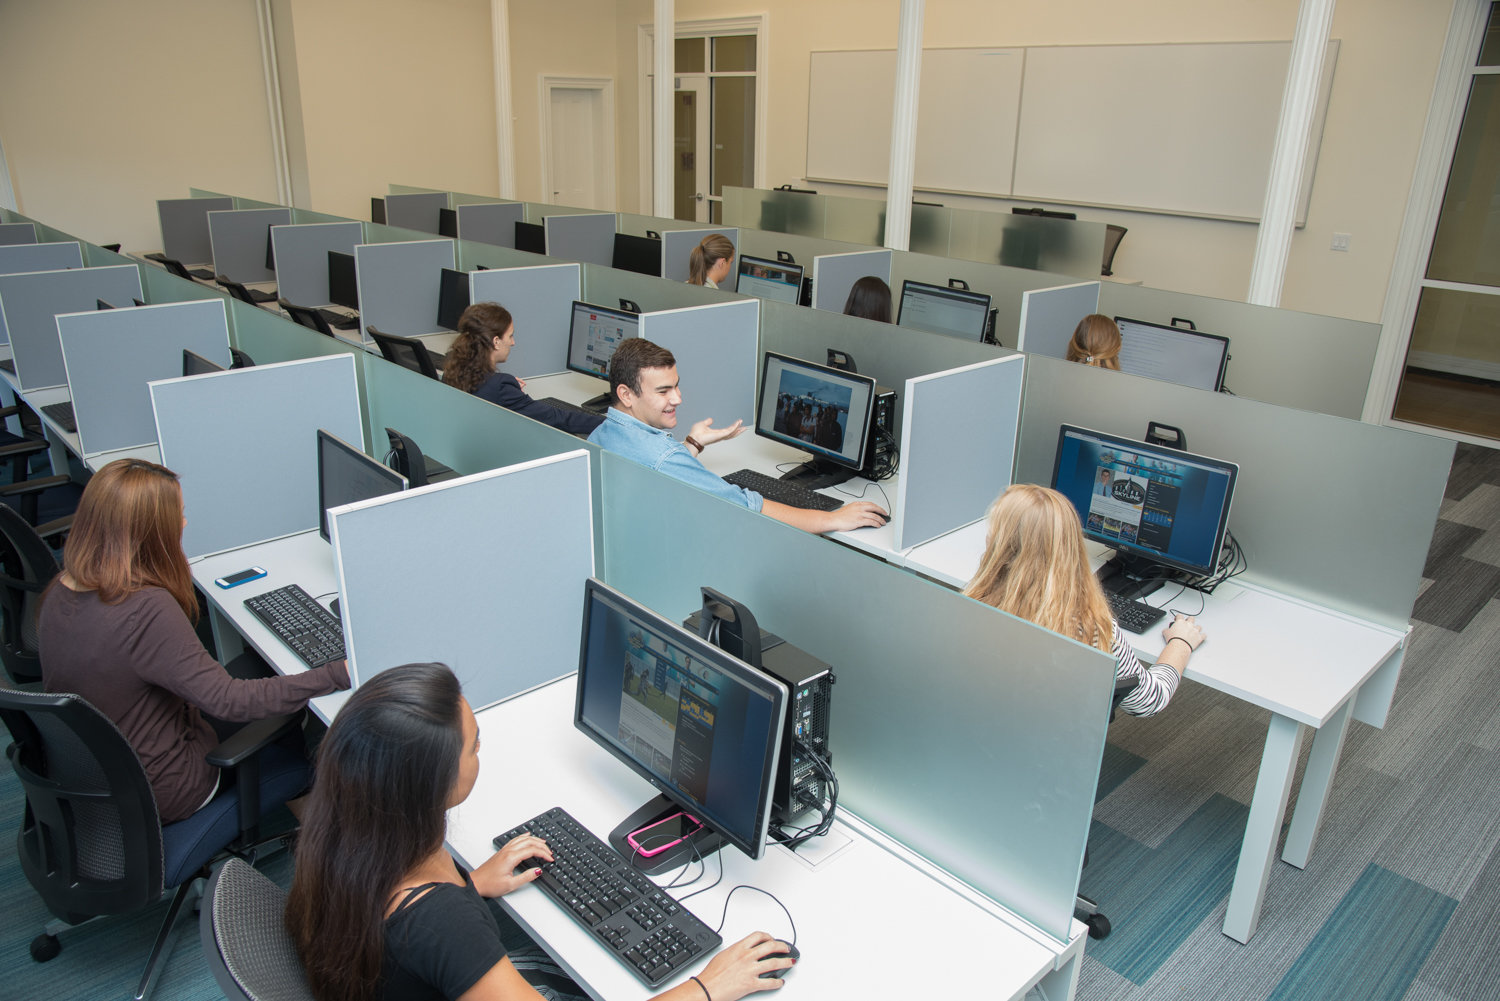 Students research on computers in a new space in Fishlinger Center at the College of Mount Saint Vincent.